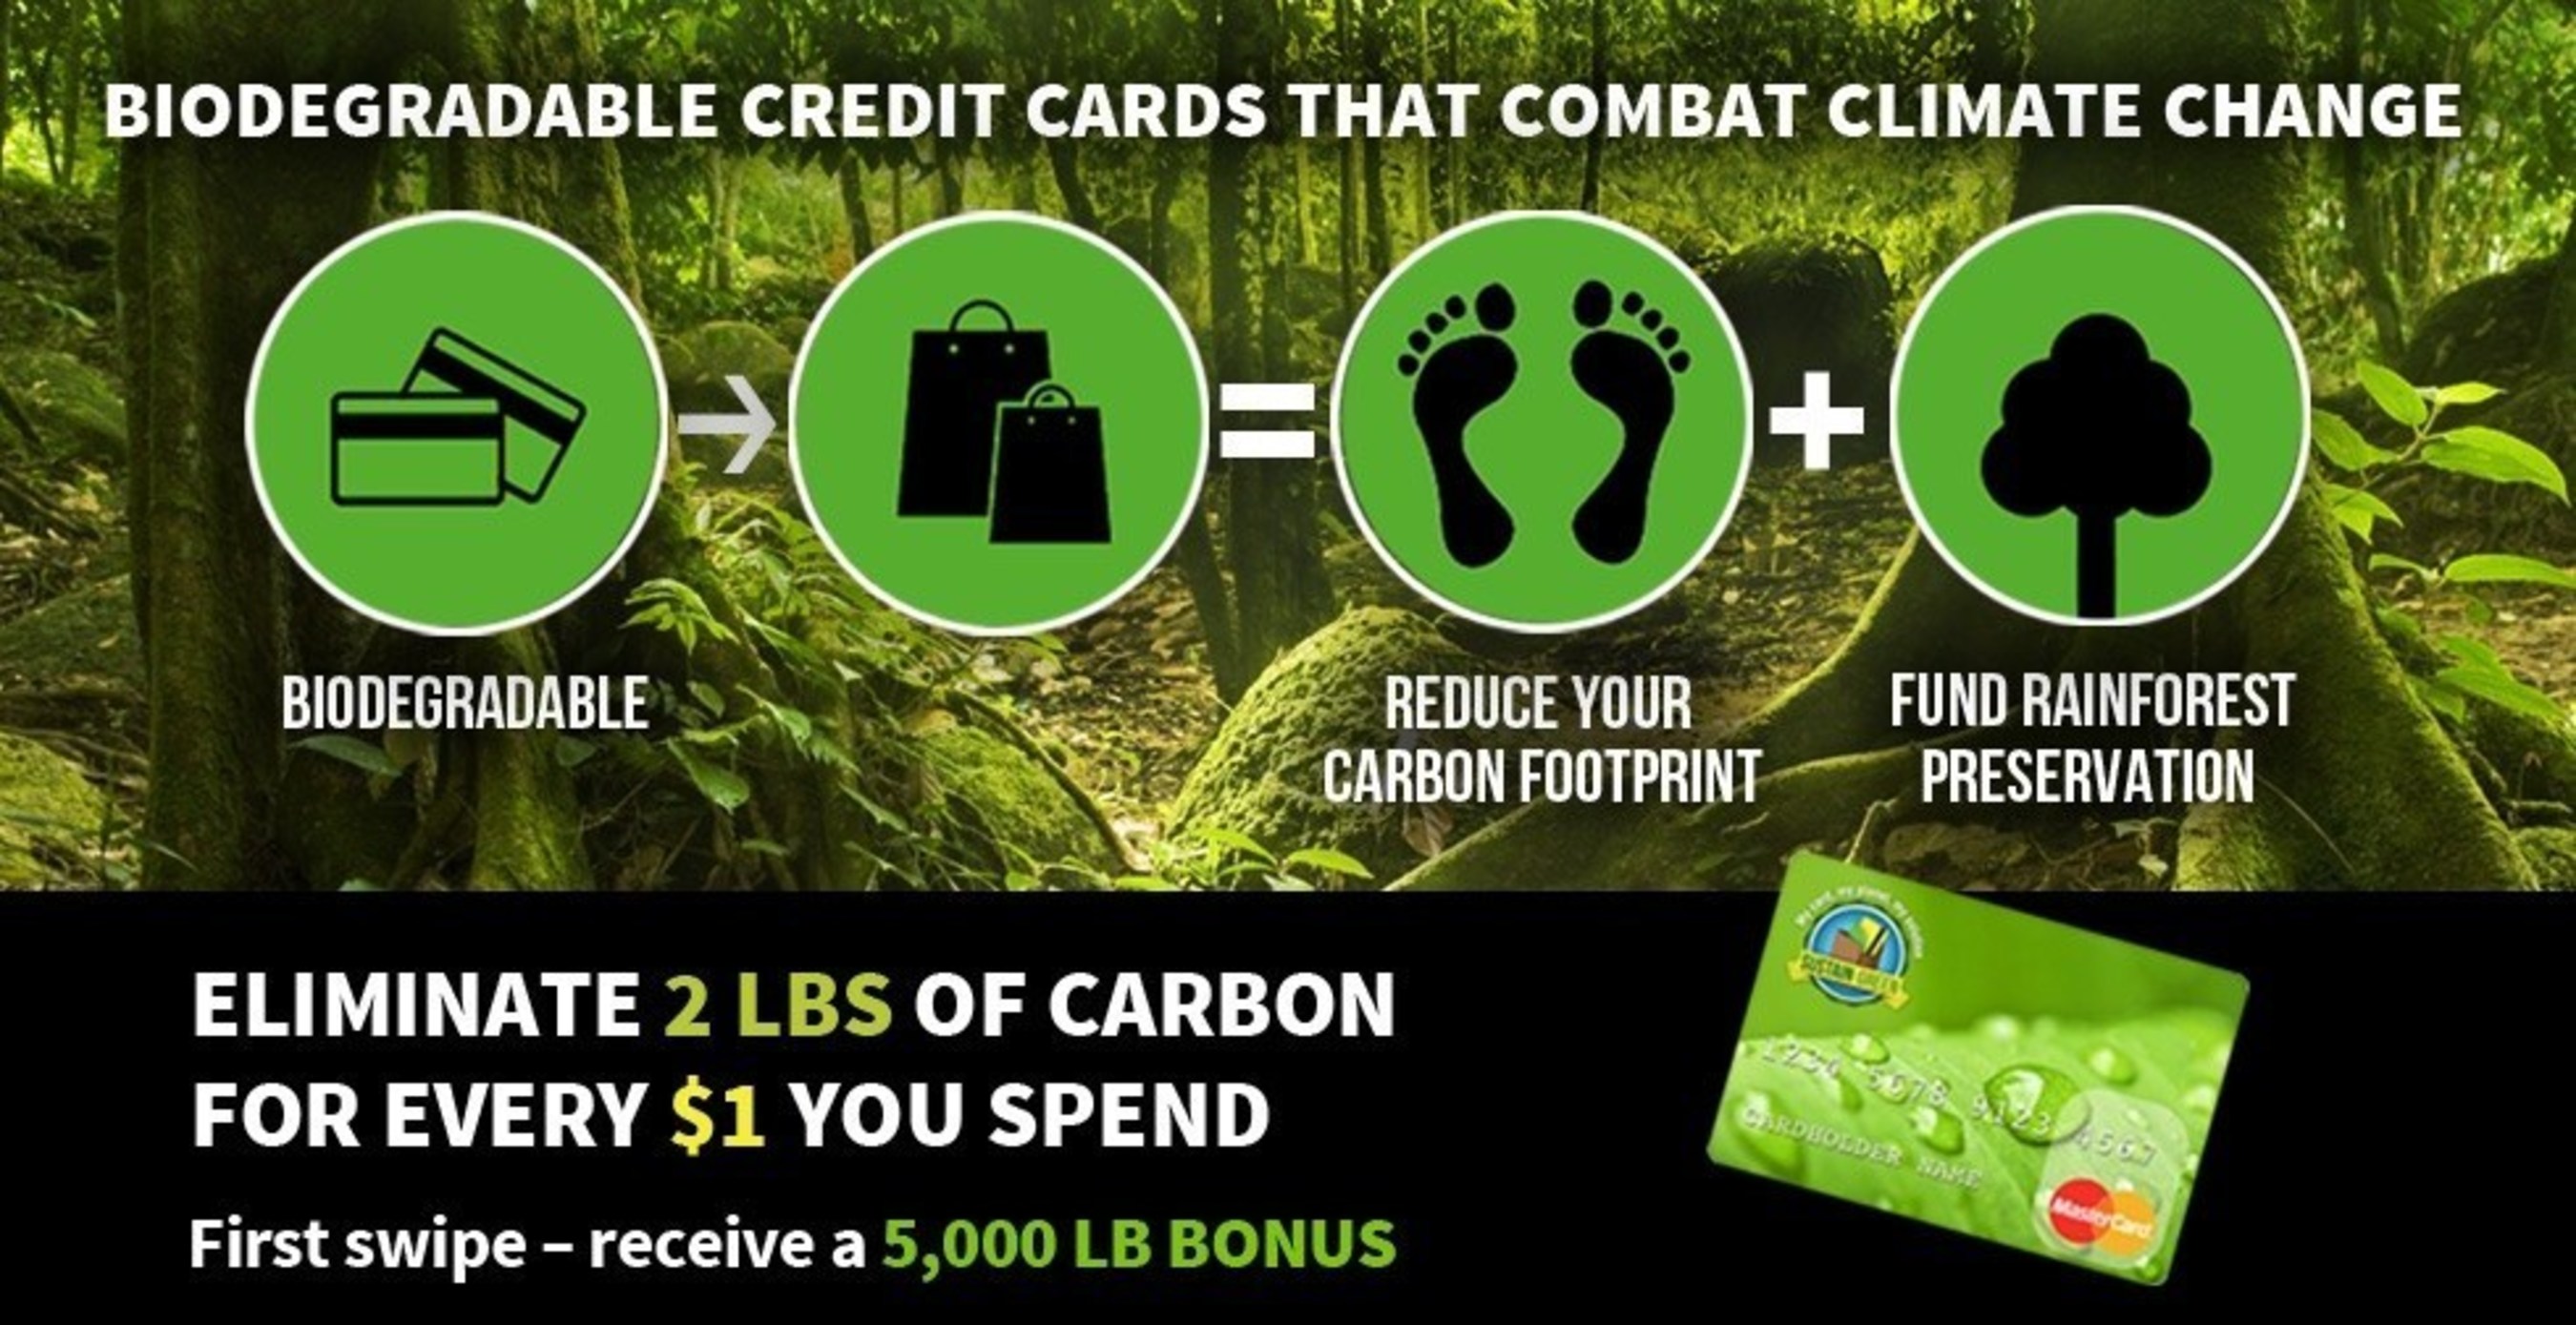 New biodegradable Sustain:Green MasterCard rewards cardholders with carbon offsets on their everyday purchases to help fund rainforest preservation projects in Brazil.